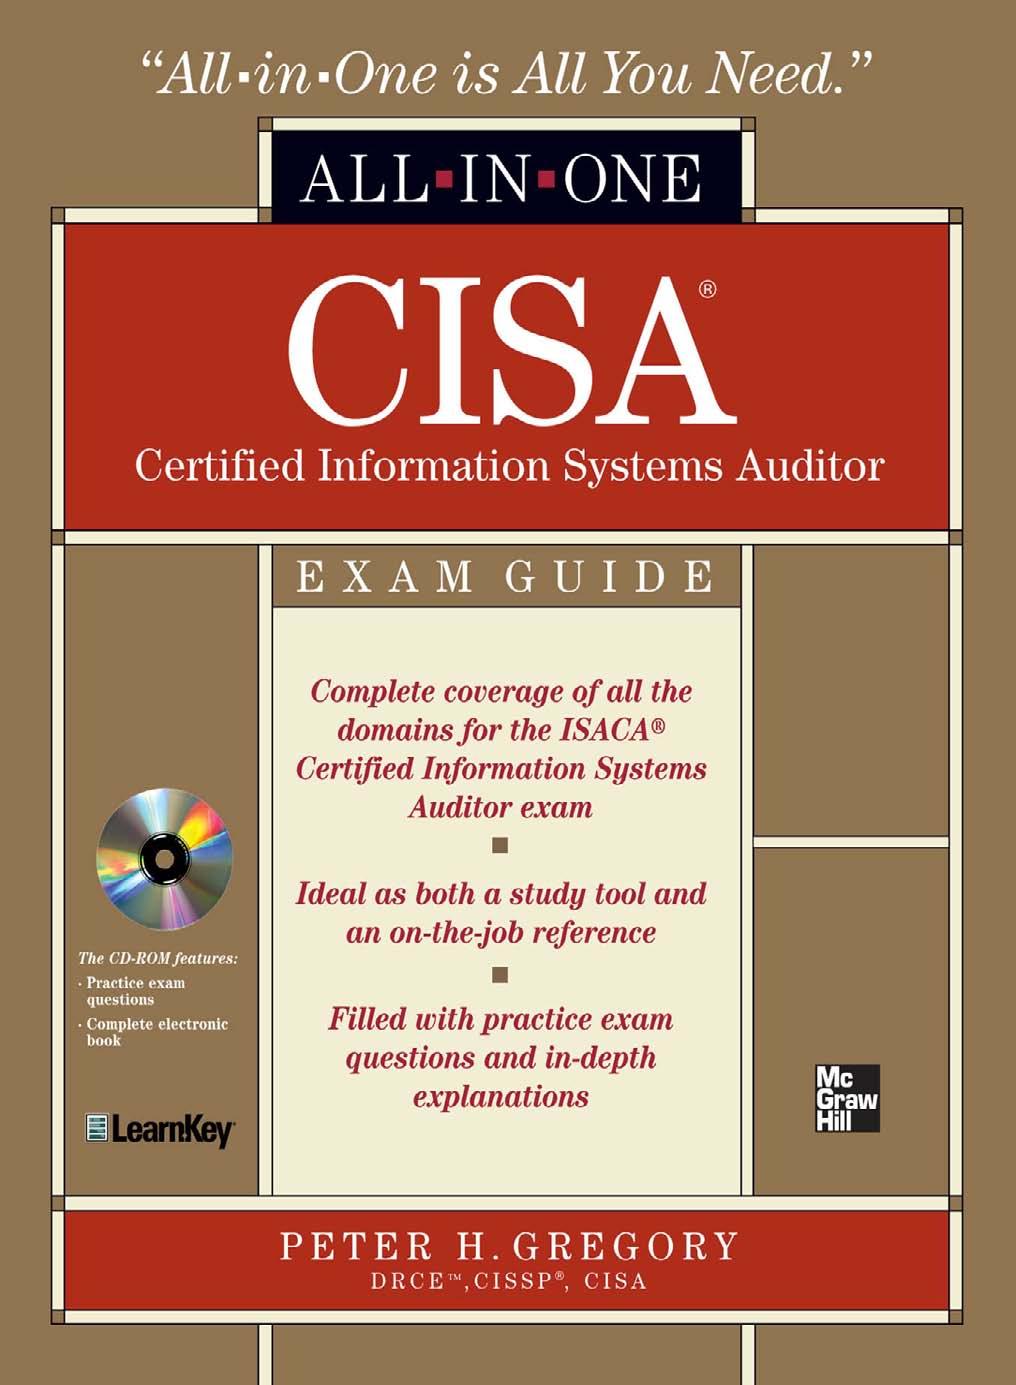 CISA Certified Information Systems Auditor All-in-One Exam Guide ( PDFDrive ) 2010